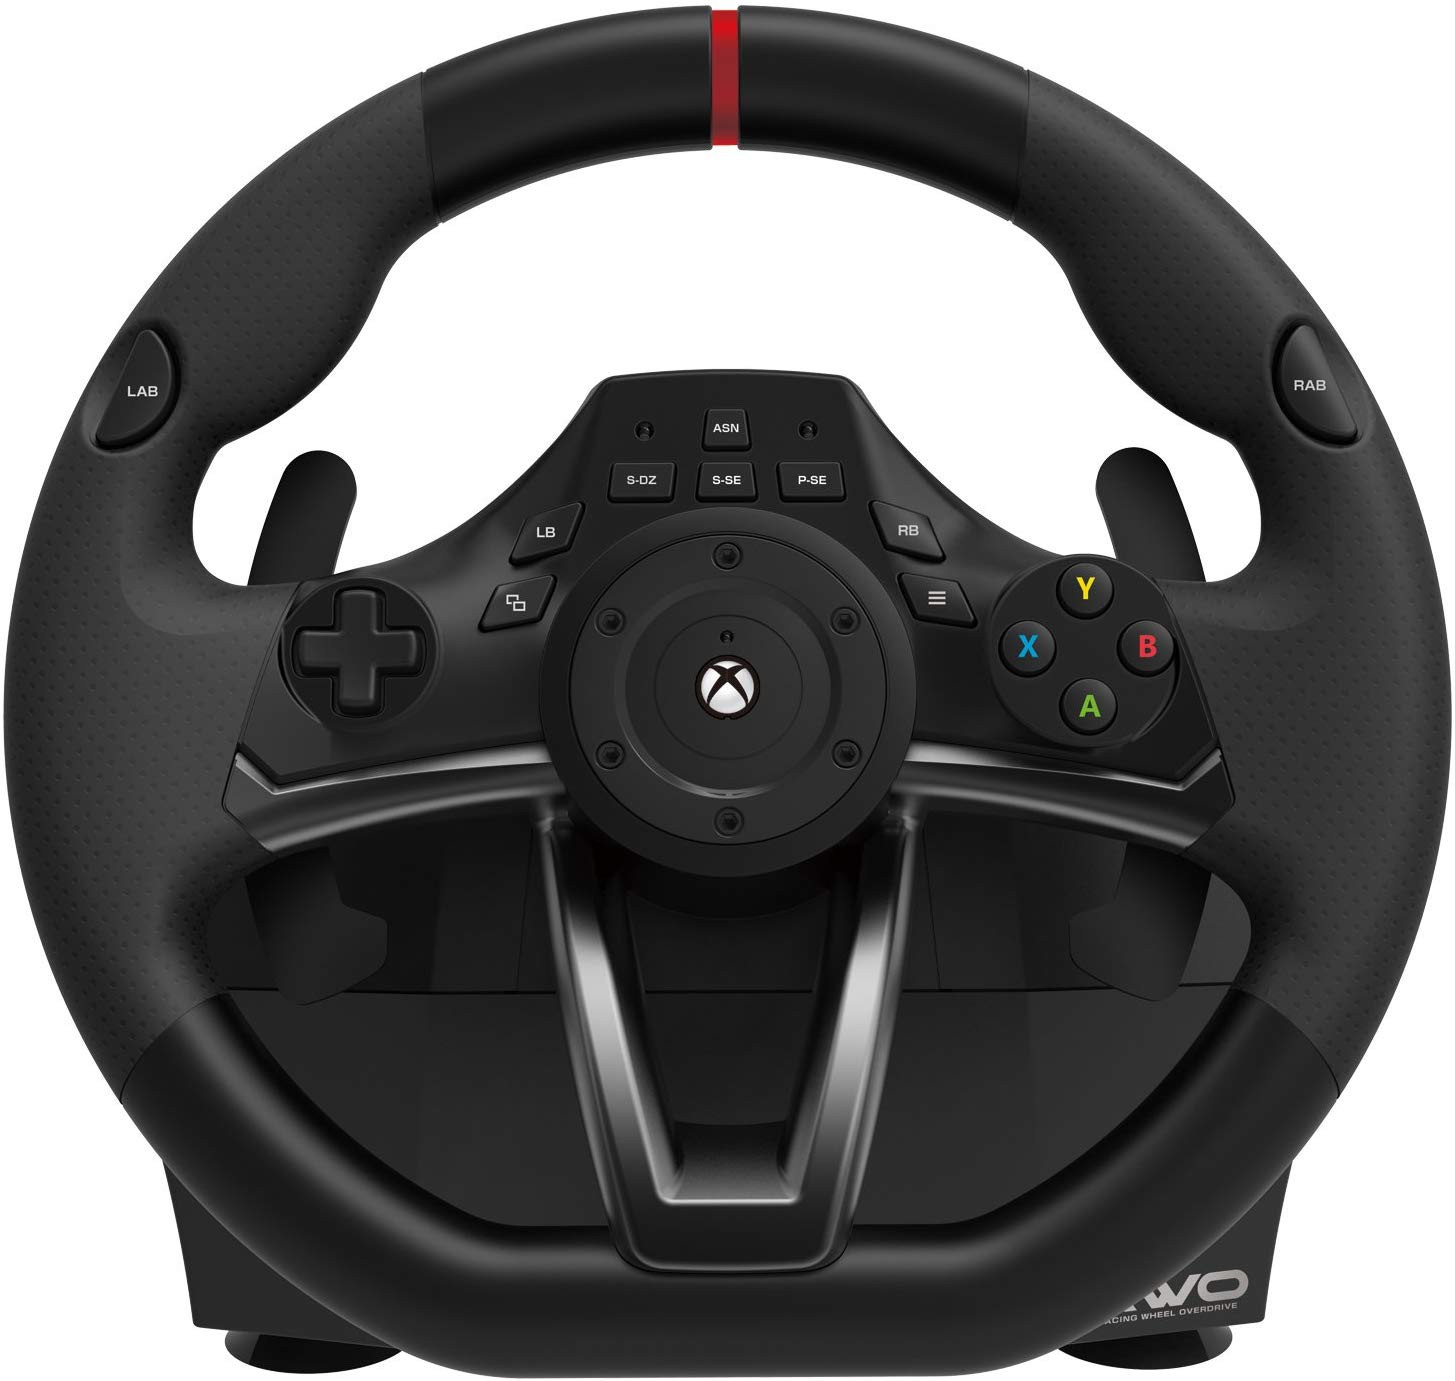 HORI  RWO Racing Wheel Overdrive controller Licensed by Microsoft| Xbox One